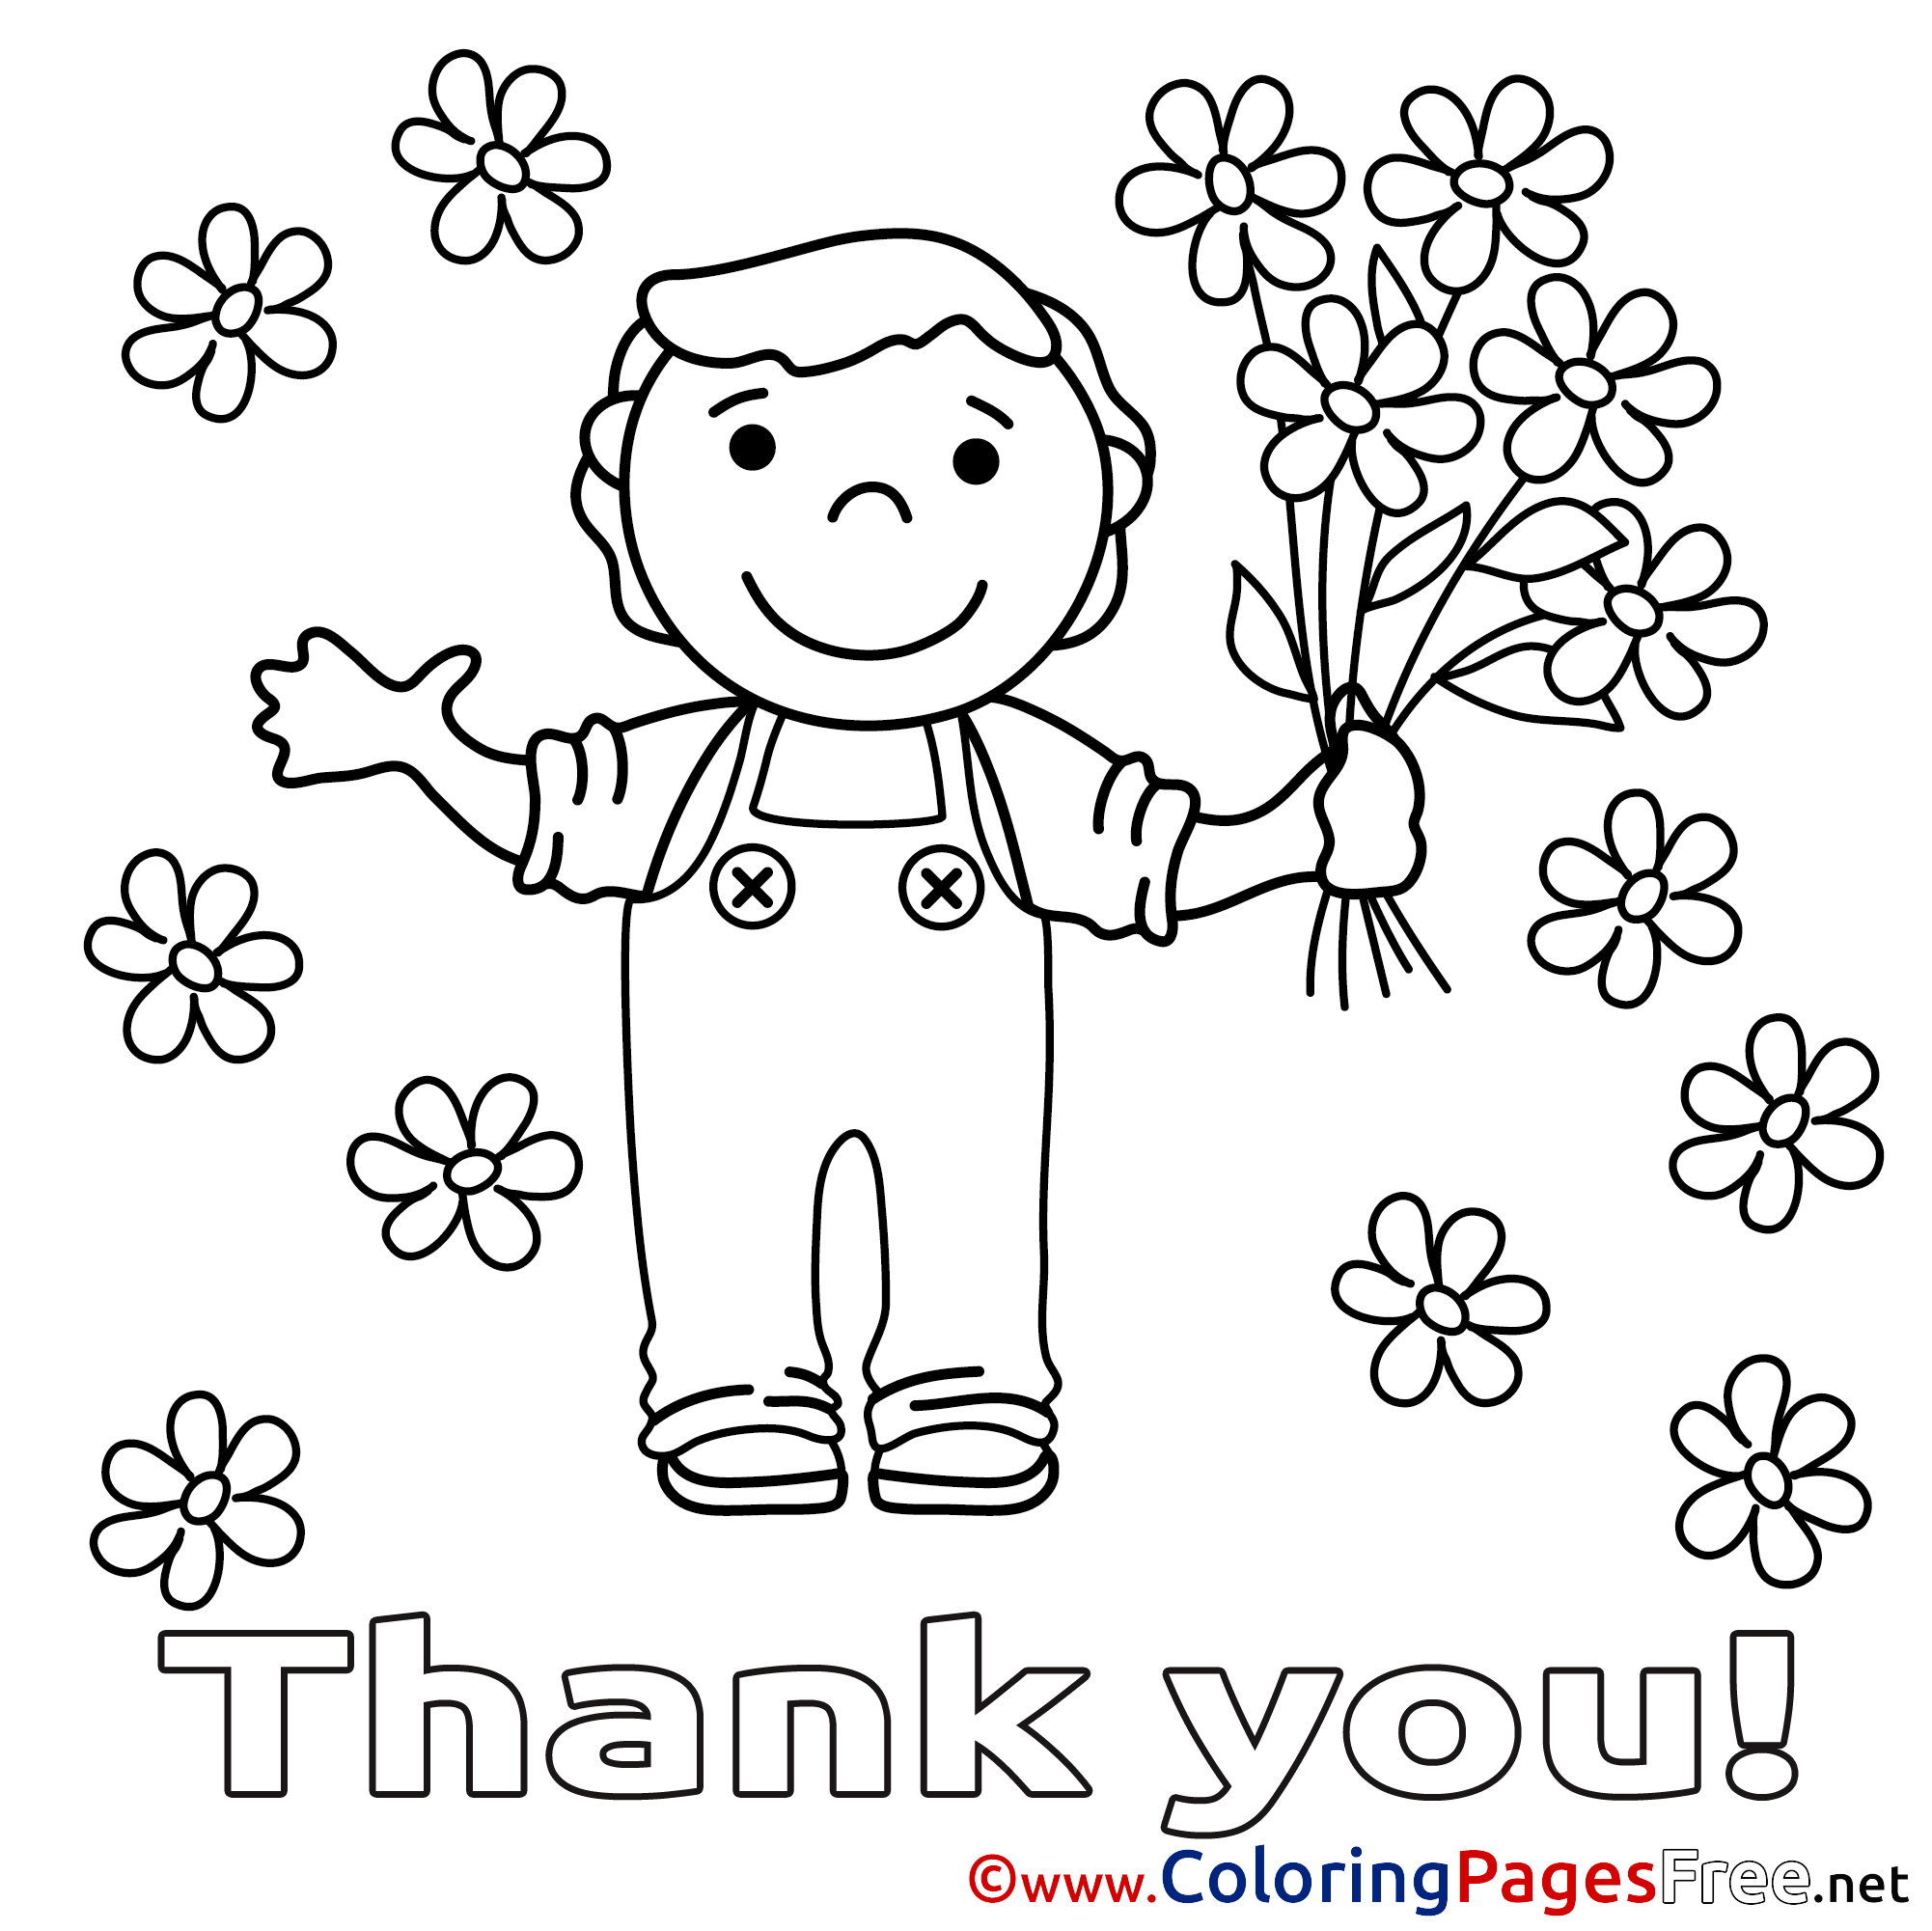 Download Top Thank You Coloring Pages Printable - cool wallpaper